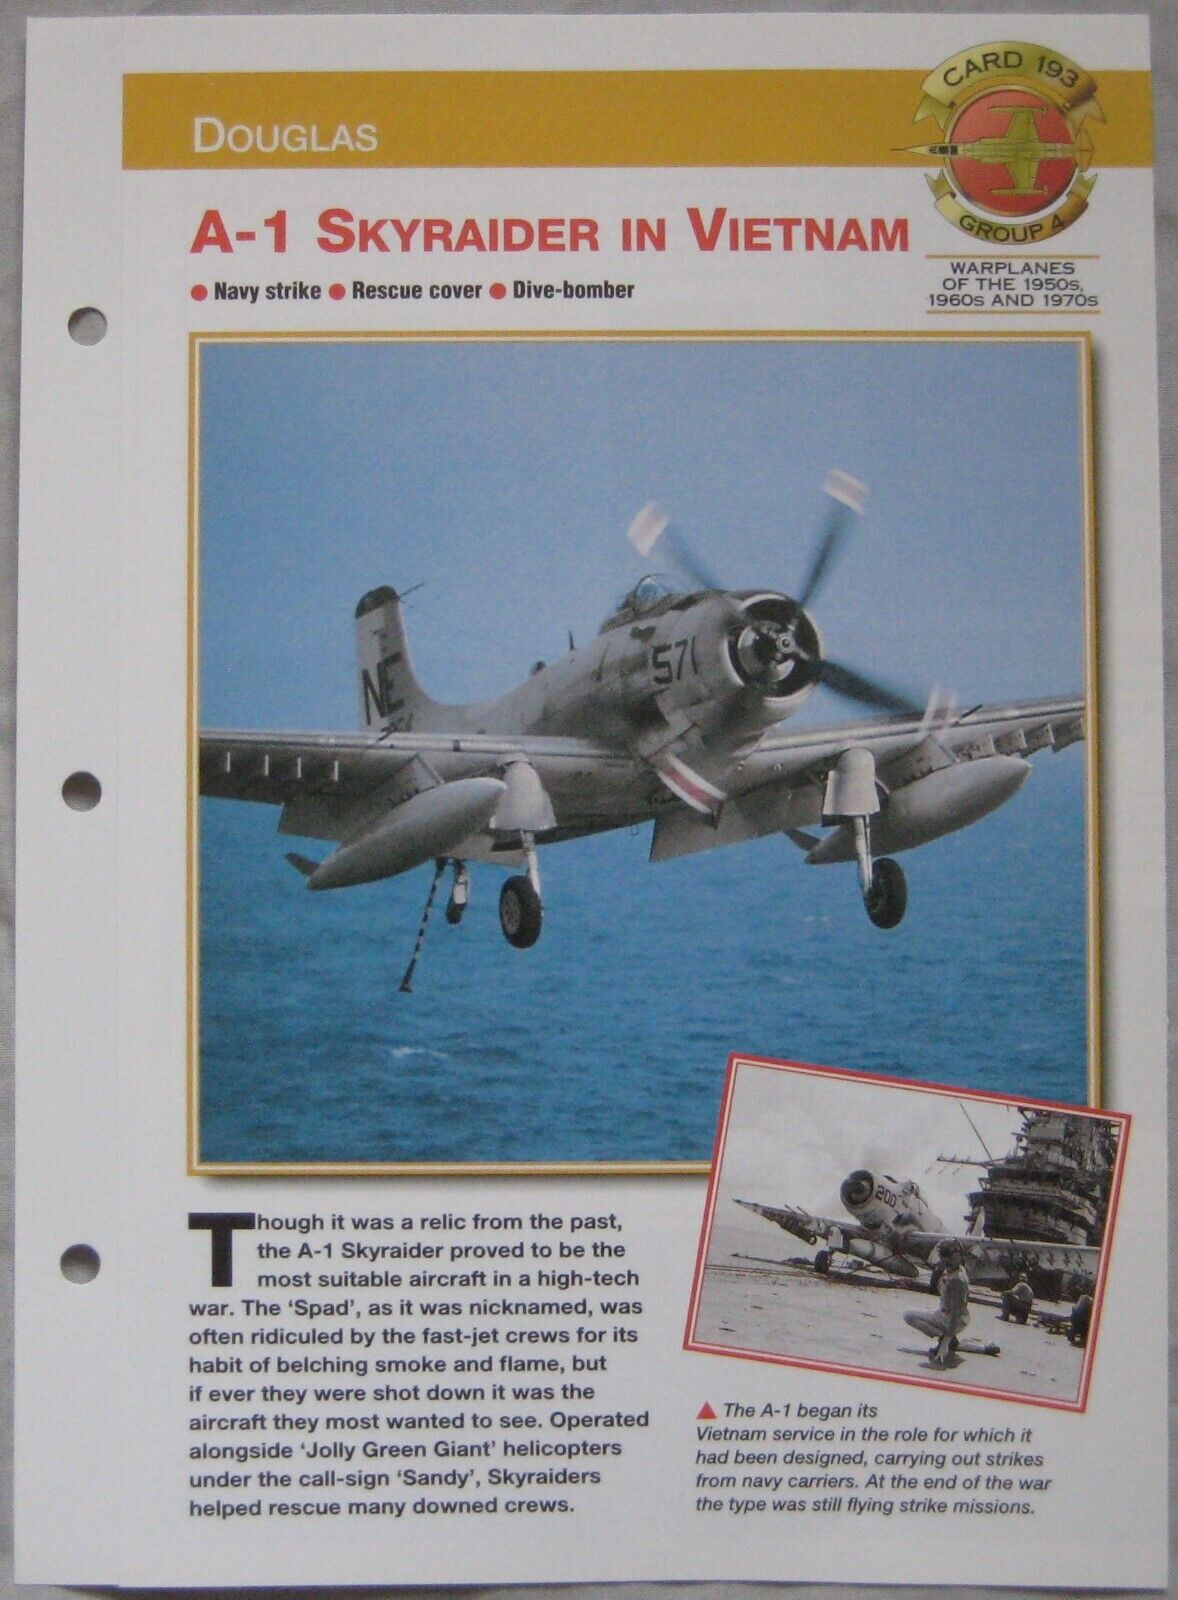 Aircraft of the World Card 193 , Group 4 - Douglas A-1 Skyraider in Vietnam